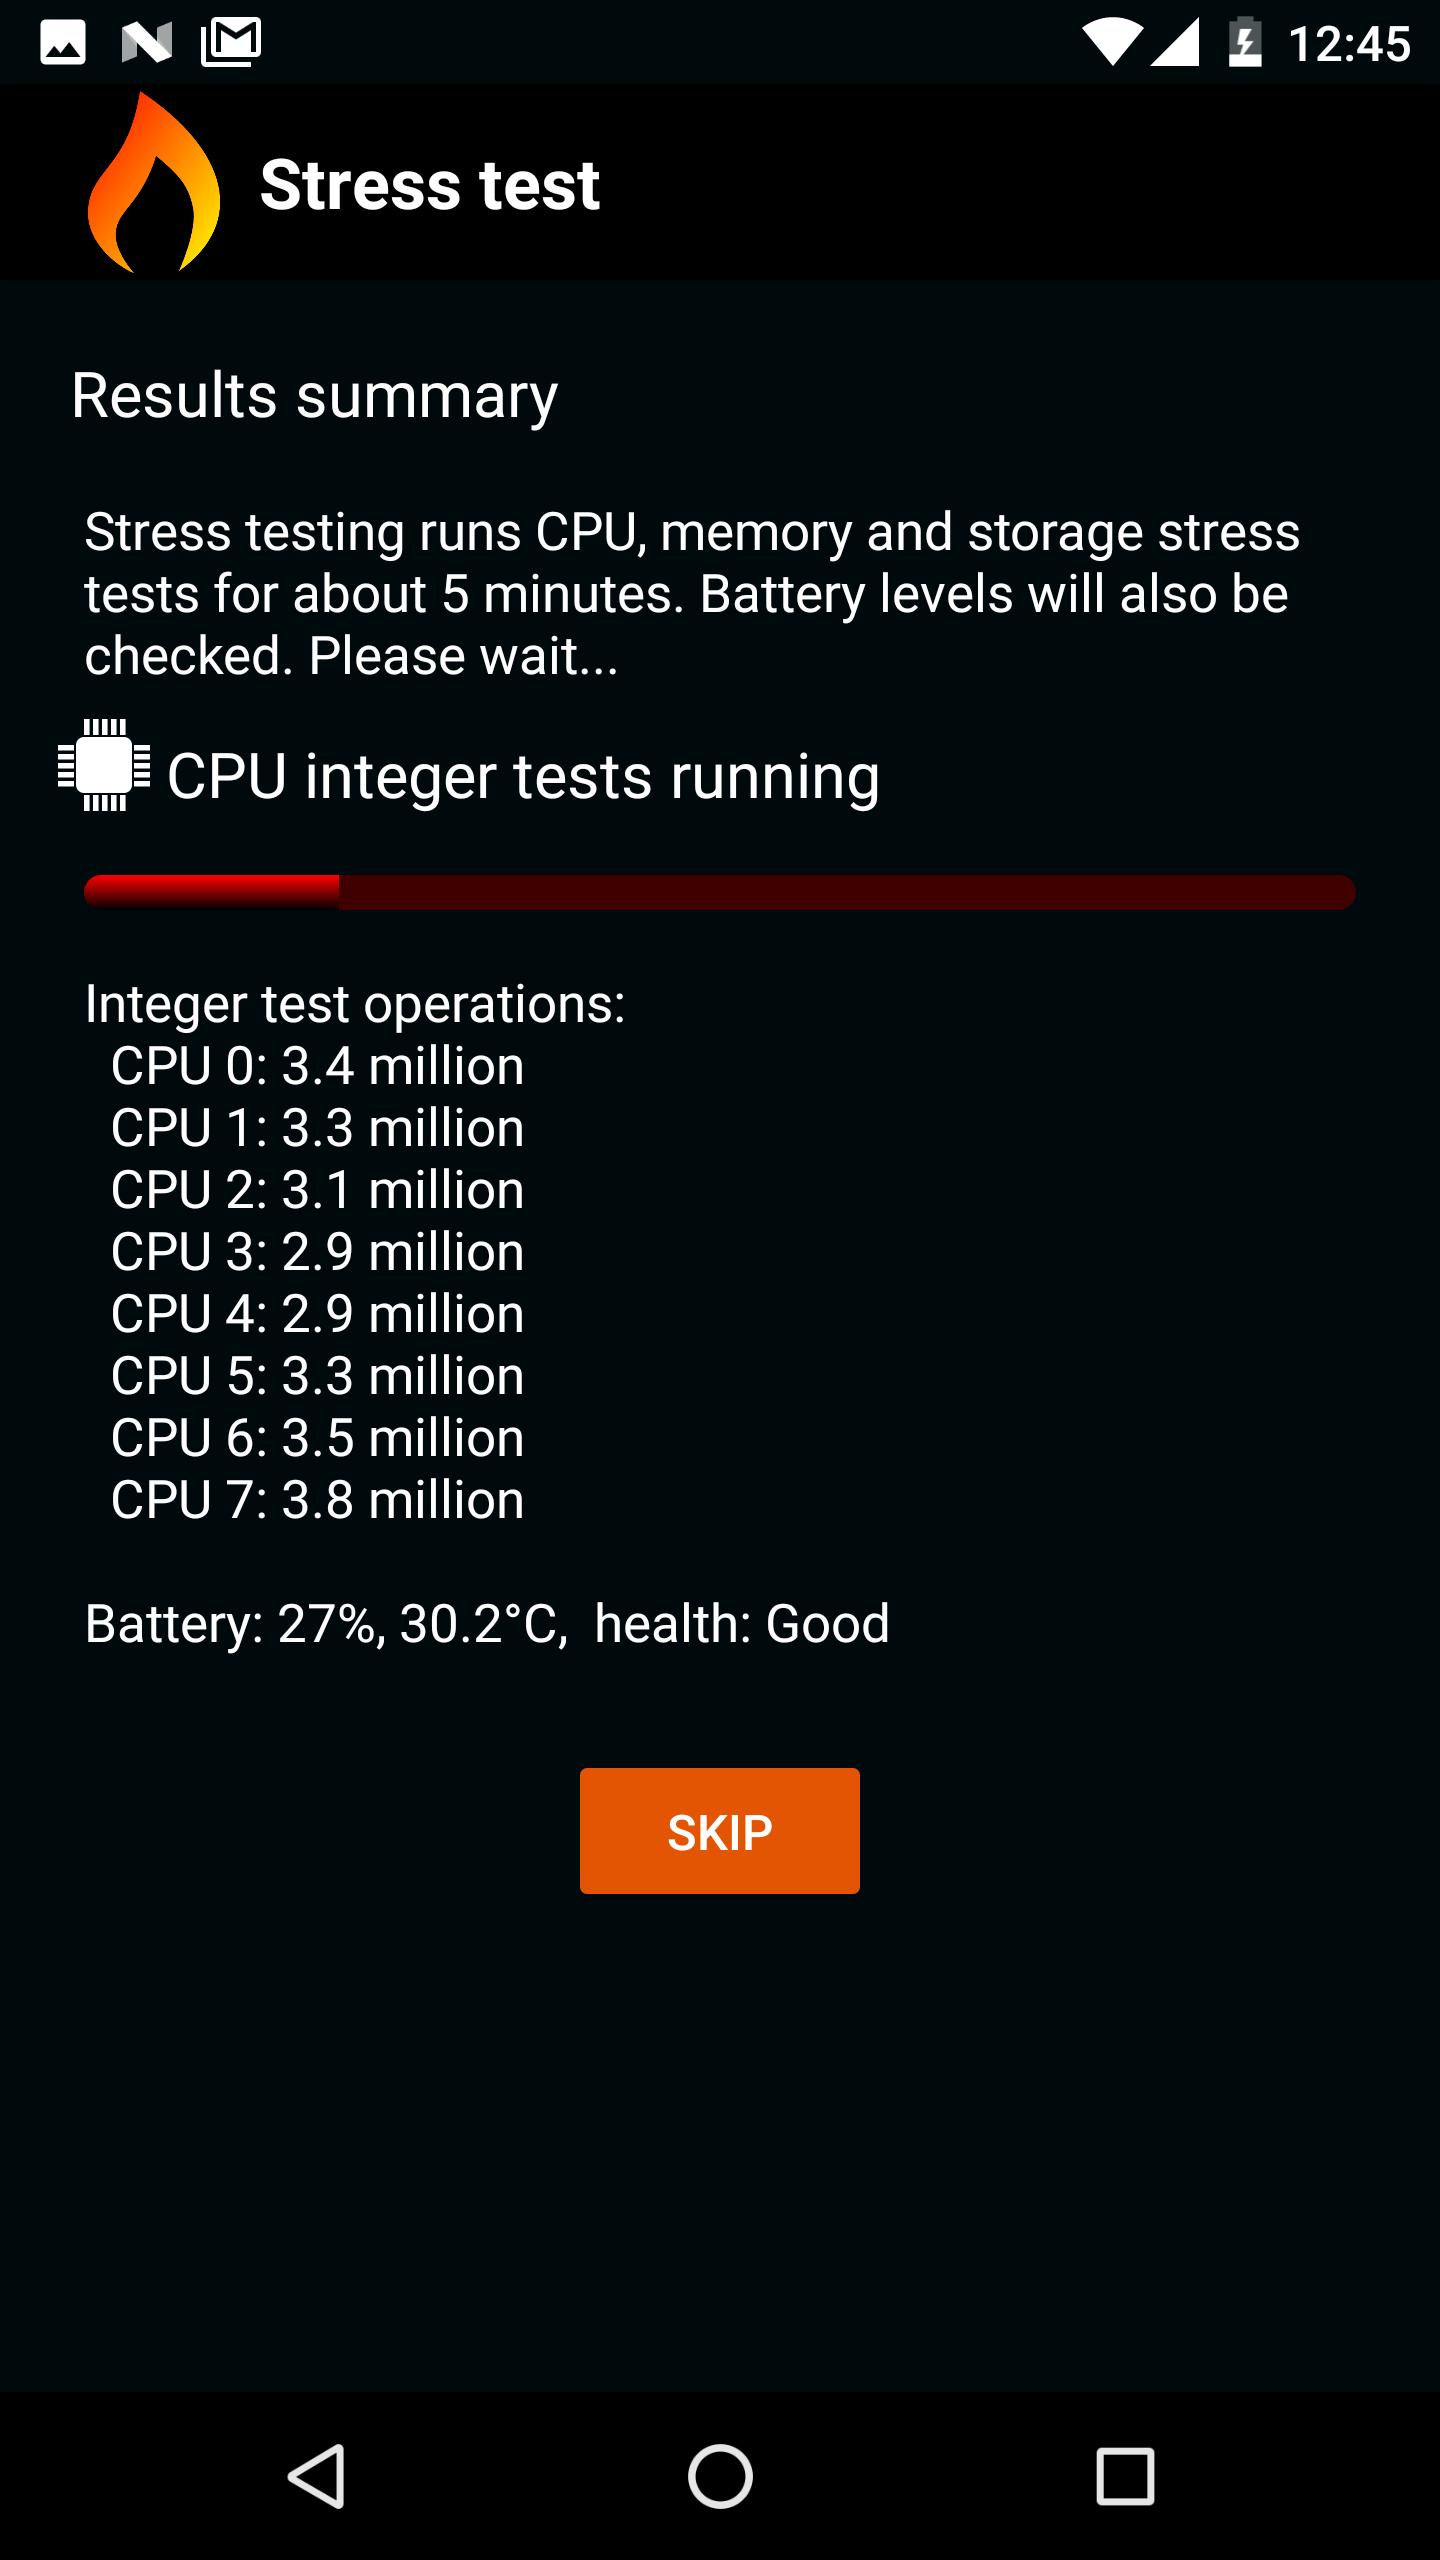 Phone Stress Test for Android - APK Download